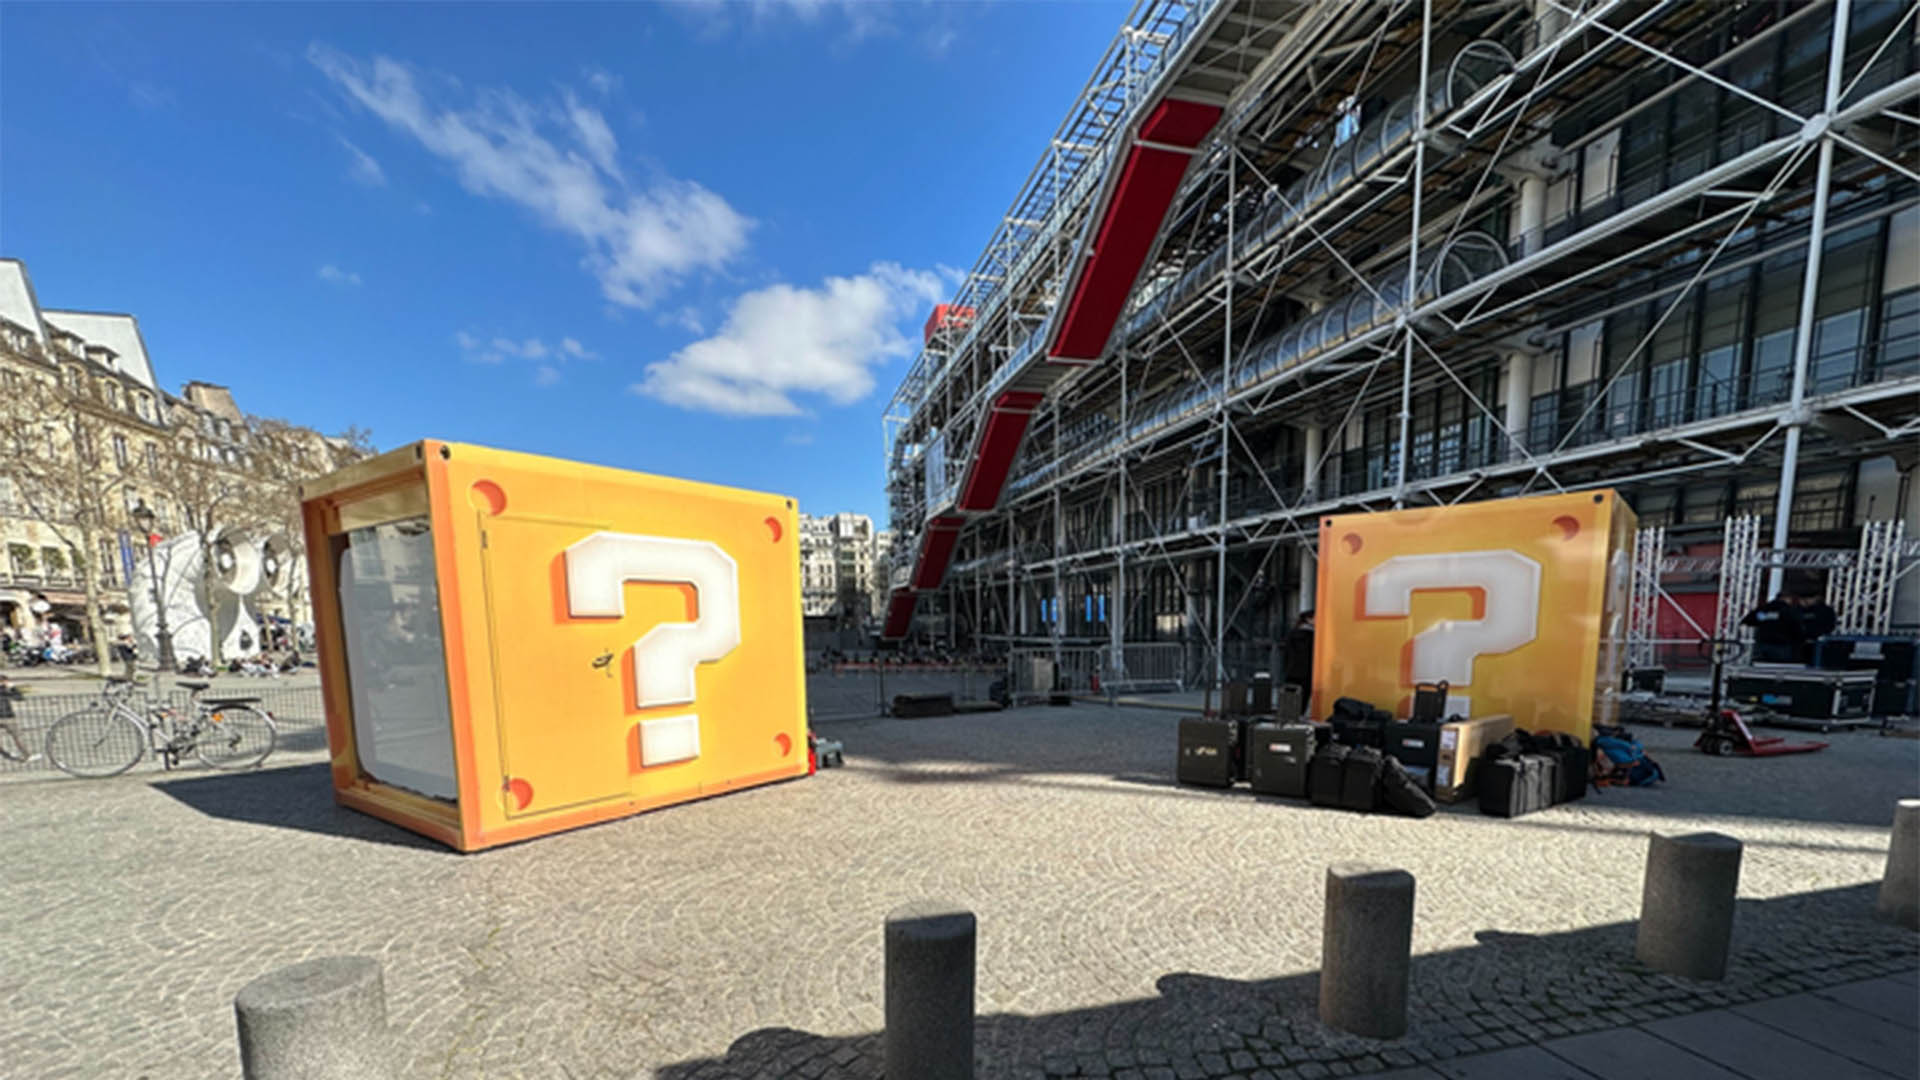 Super Mario Bros. The Movie installation in front of the Center Pompidou (Image courtesy of Twitch)